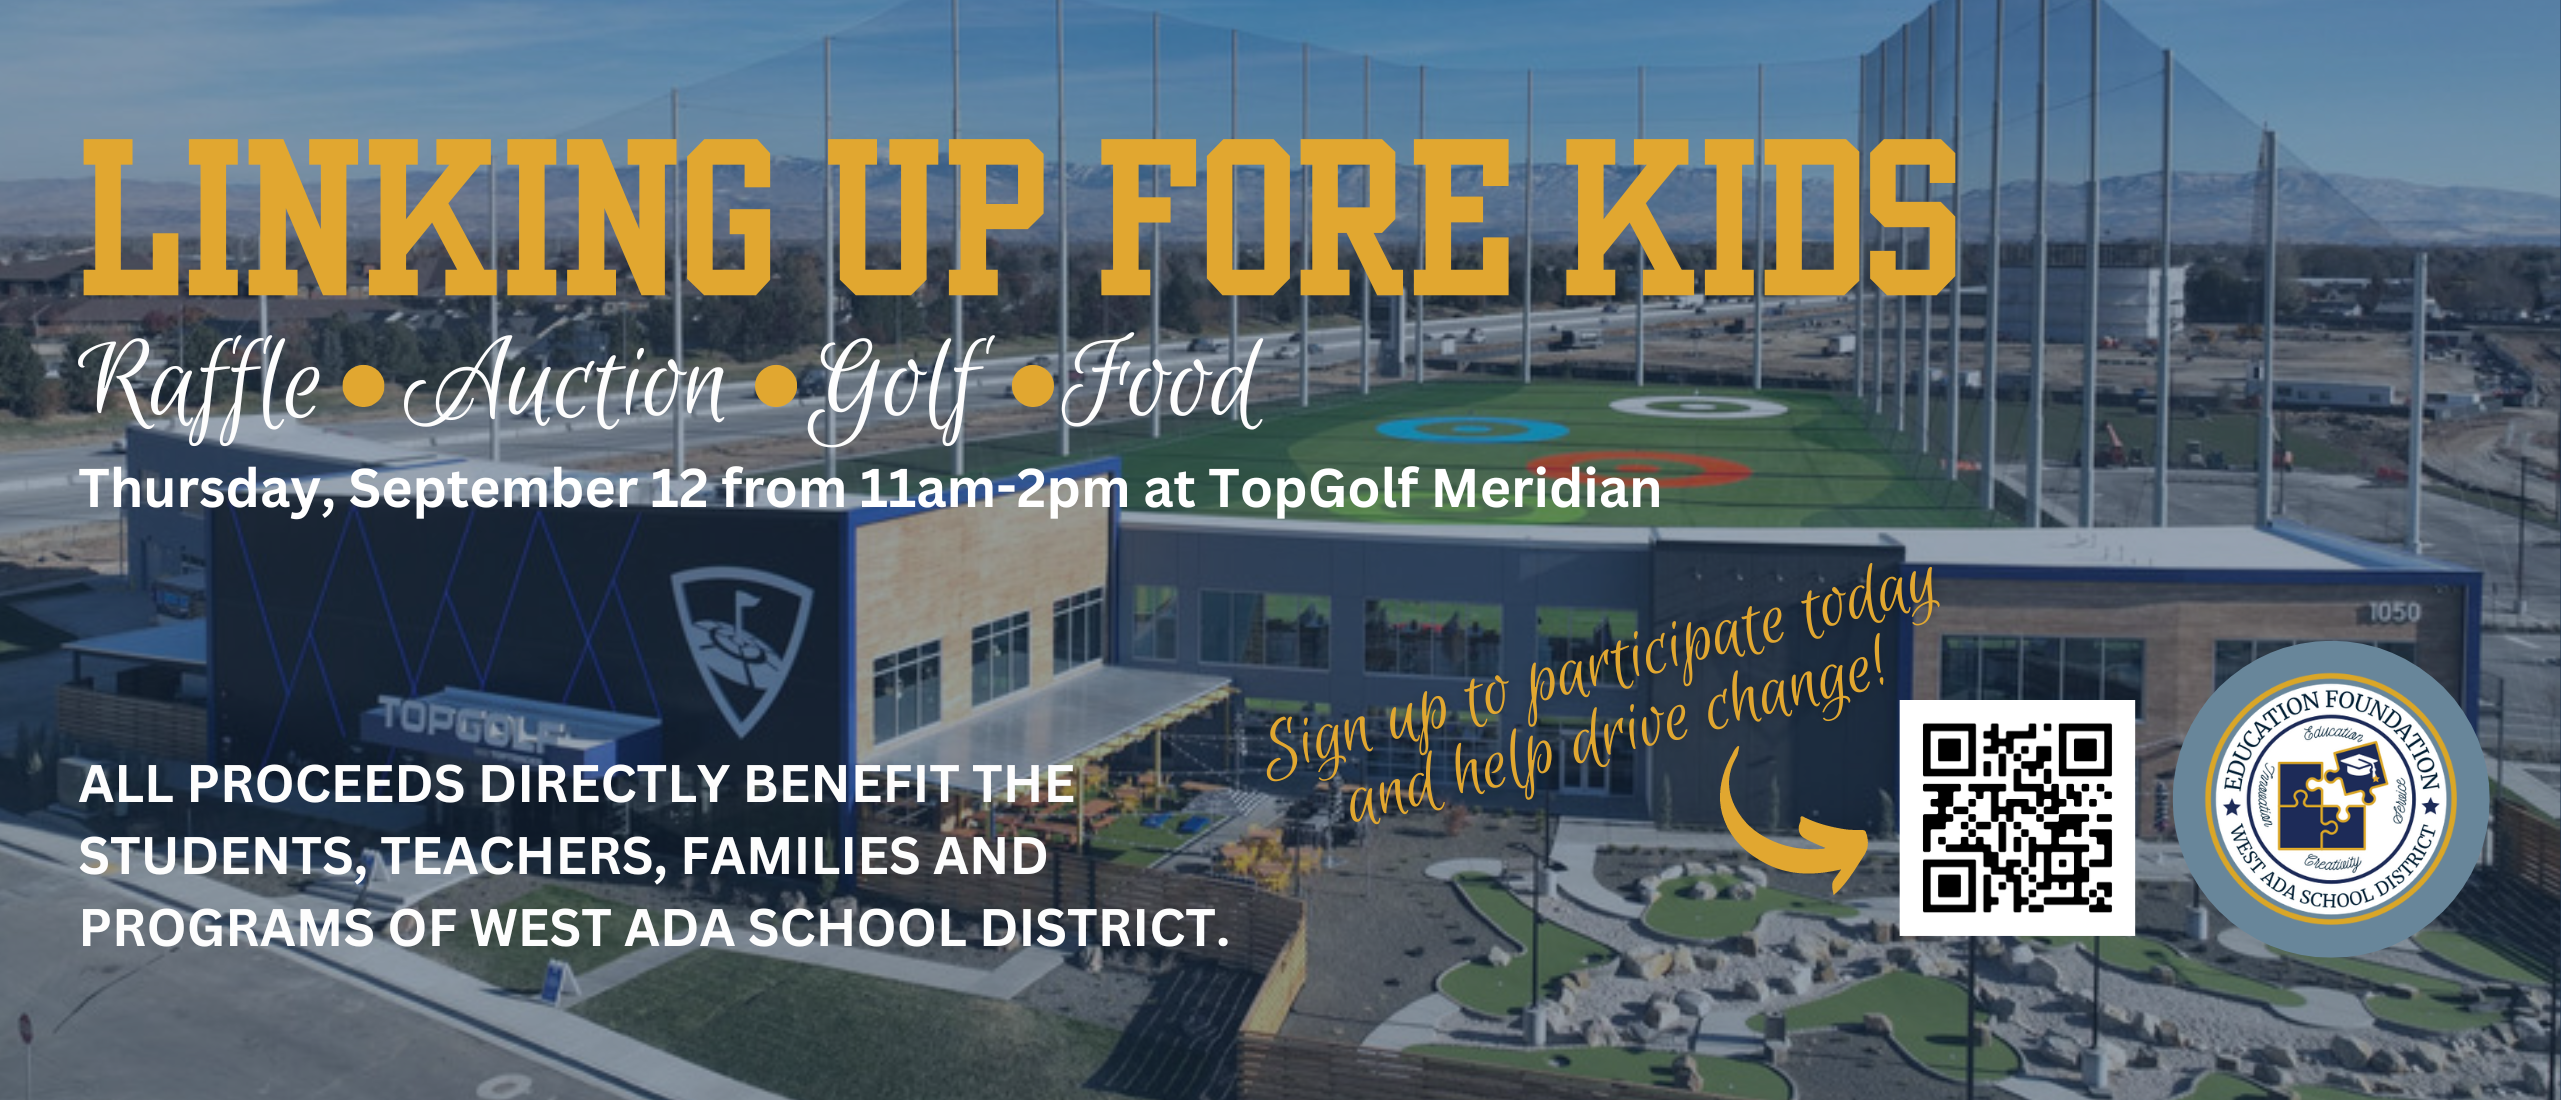 linking up fore kids - raffle, auction, golf, food - thursday, september 12 from 11am-2pm at topgolf meridian